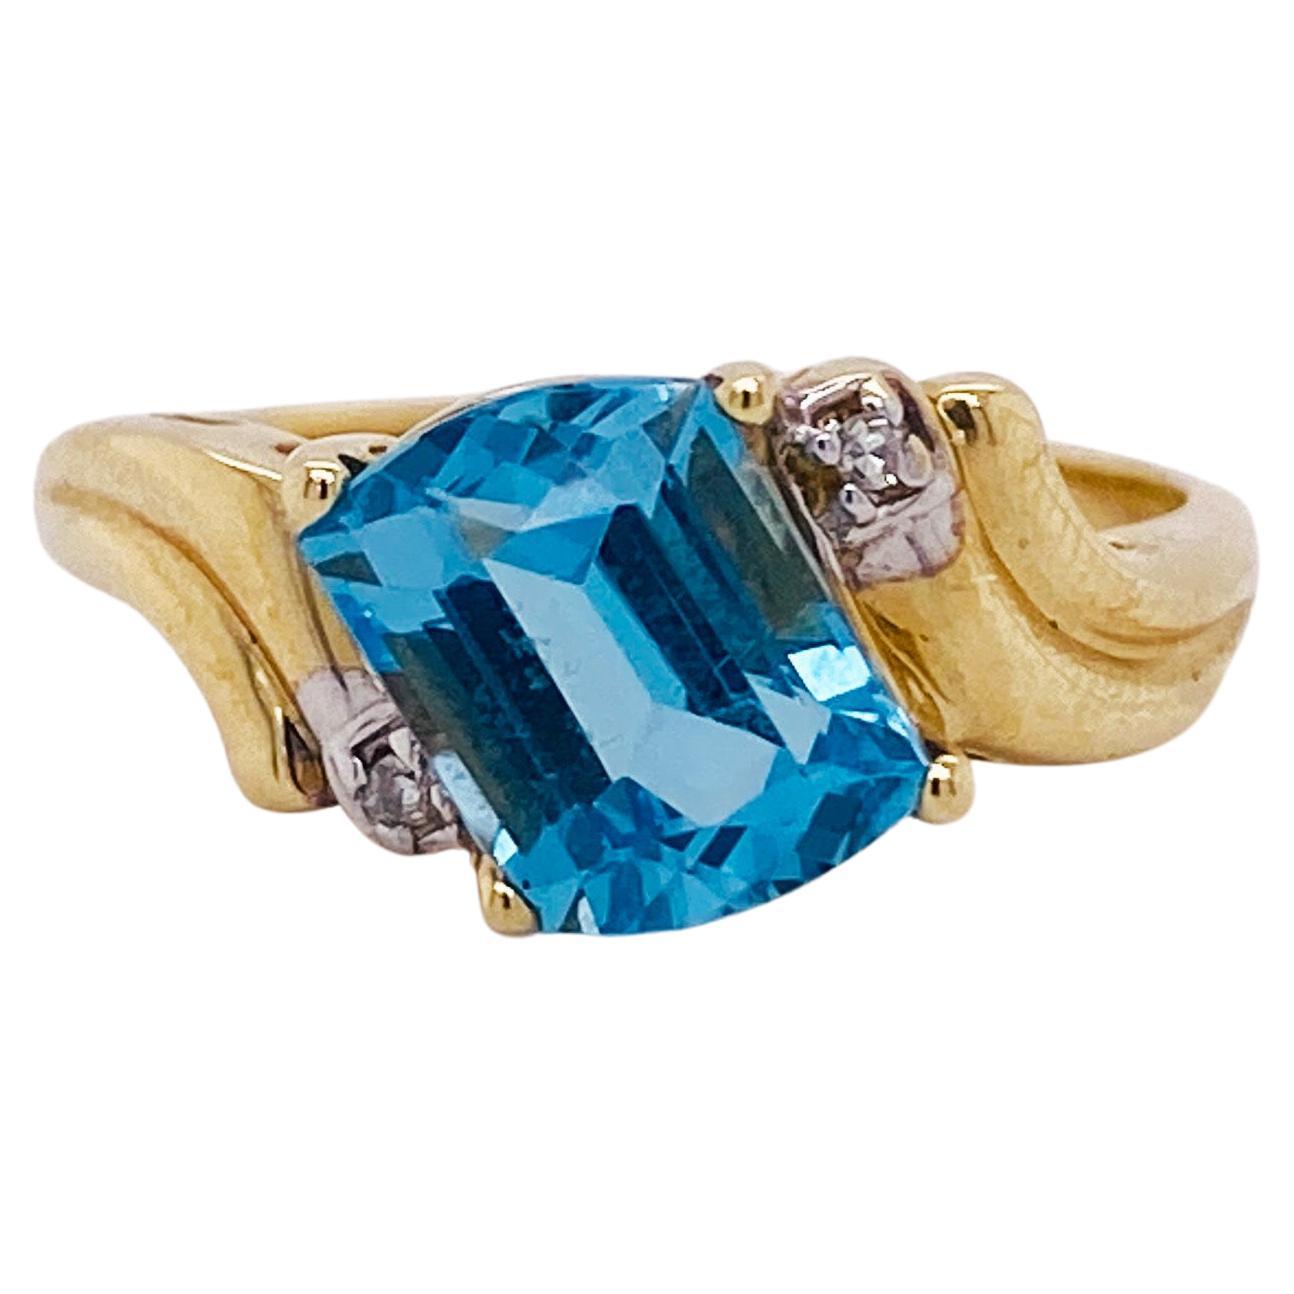 1.25 Carat Fancy Cut Blue Topaz, 14k Gold Bypass Ring with Diamond Accents For Sale